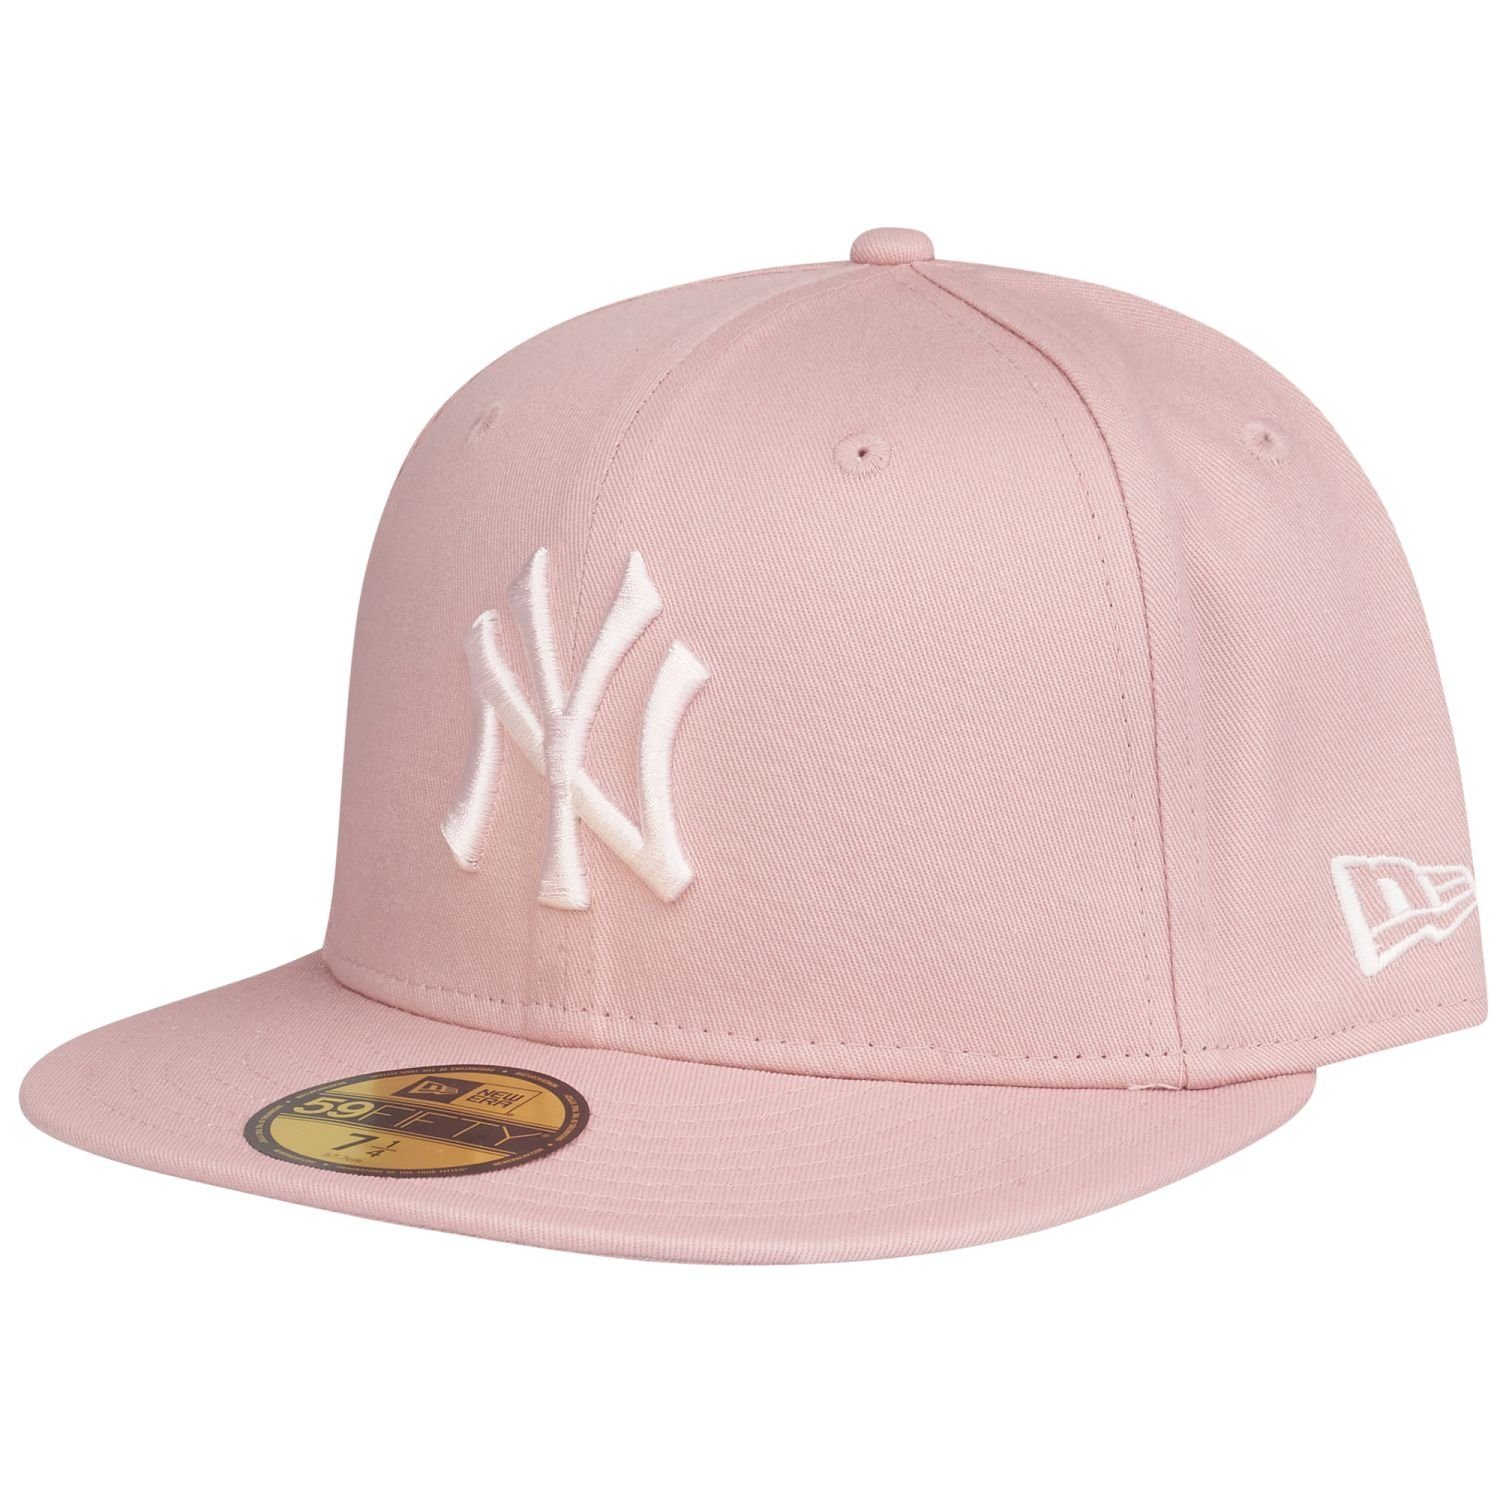 59Fifty New Fitted Yankees Era York New Cap